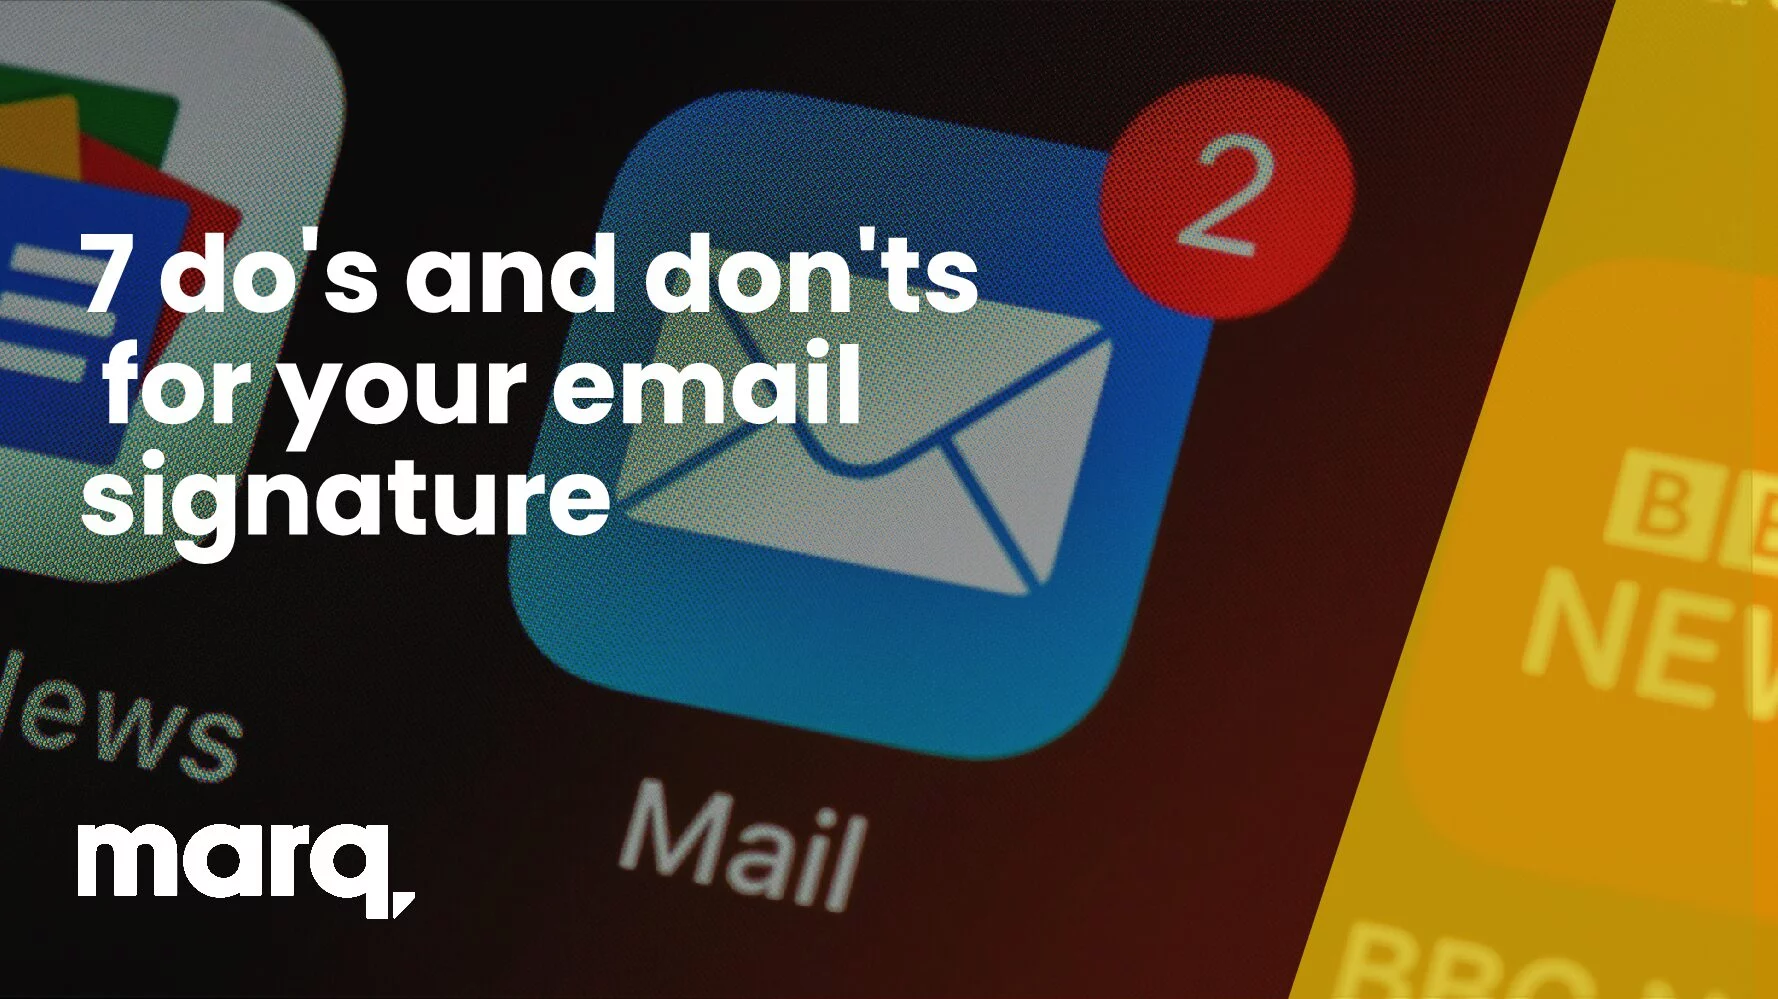 7 do's and don'ts for your email signature